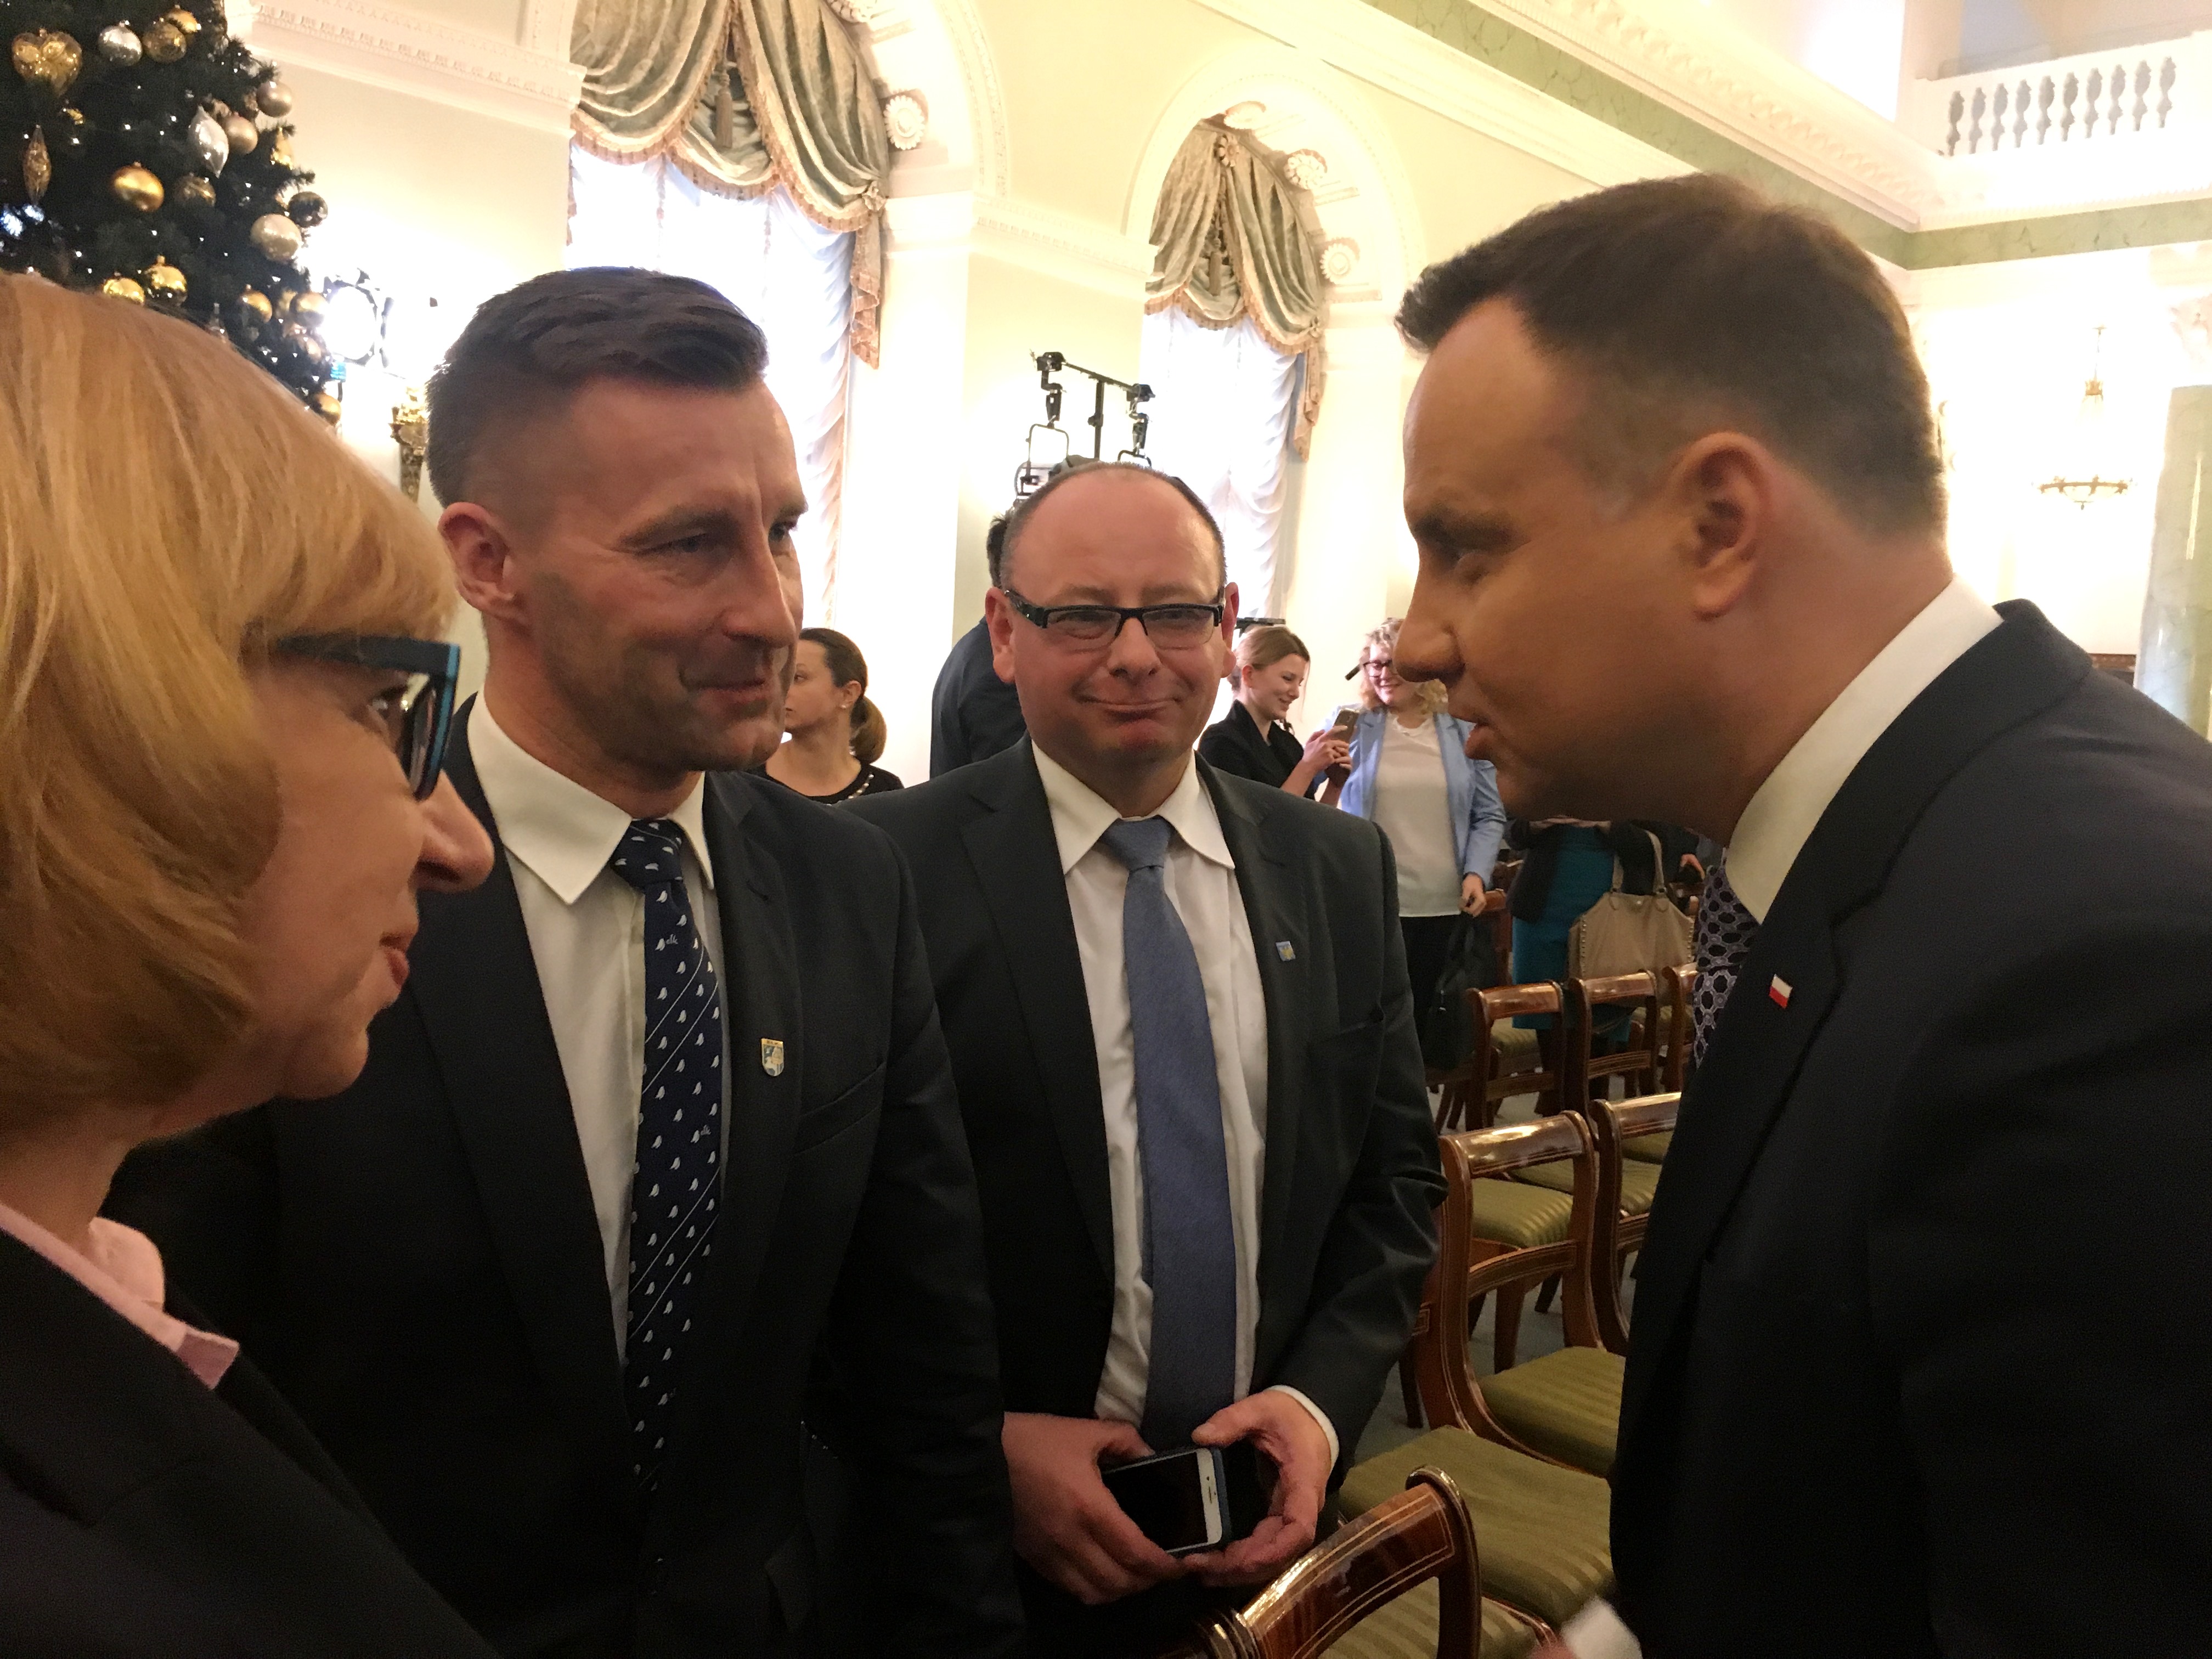 Debate and discussion with the President of the Republic of Poland "Together with the Constitution, together with the regime"